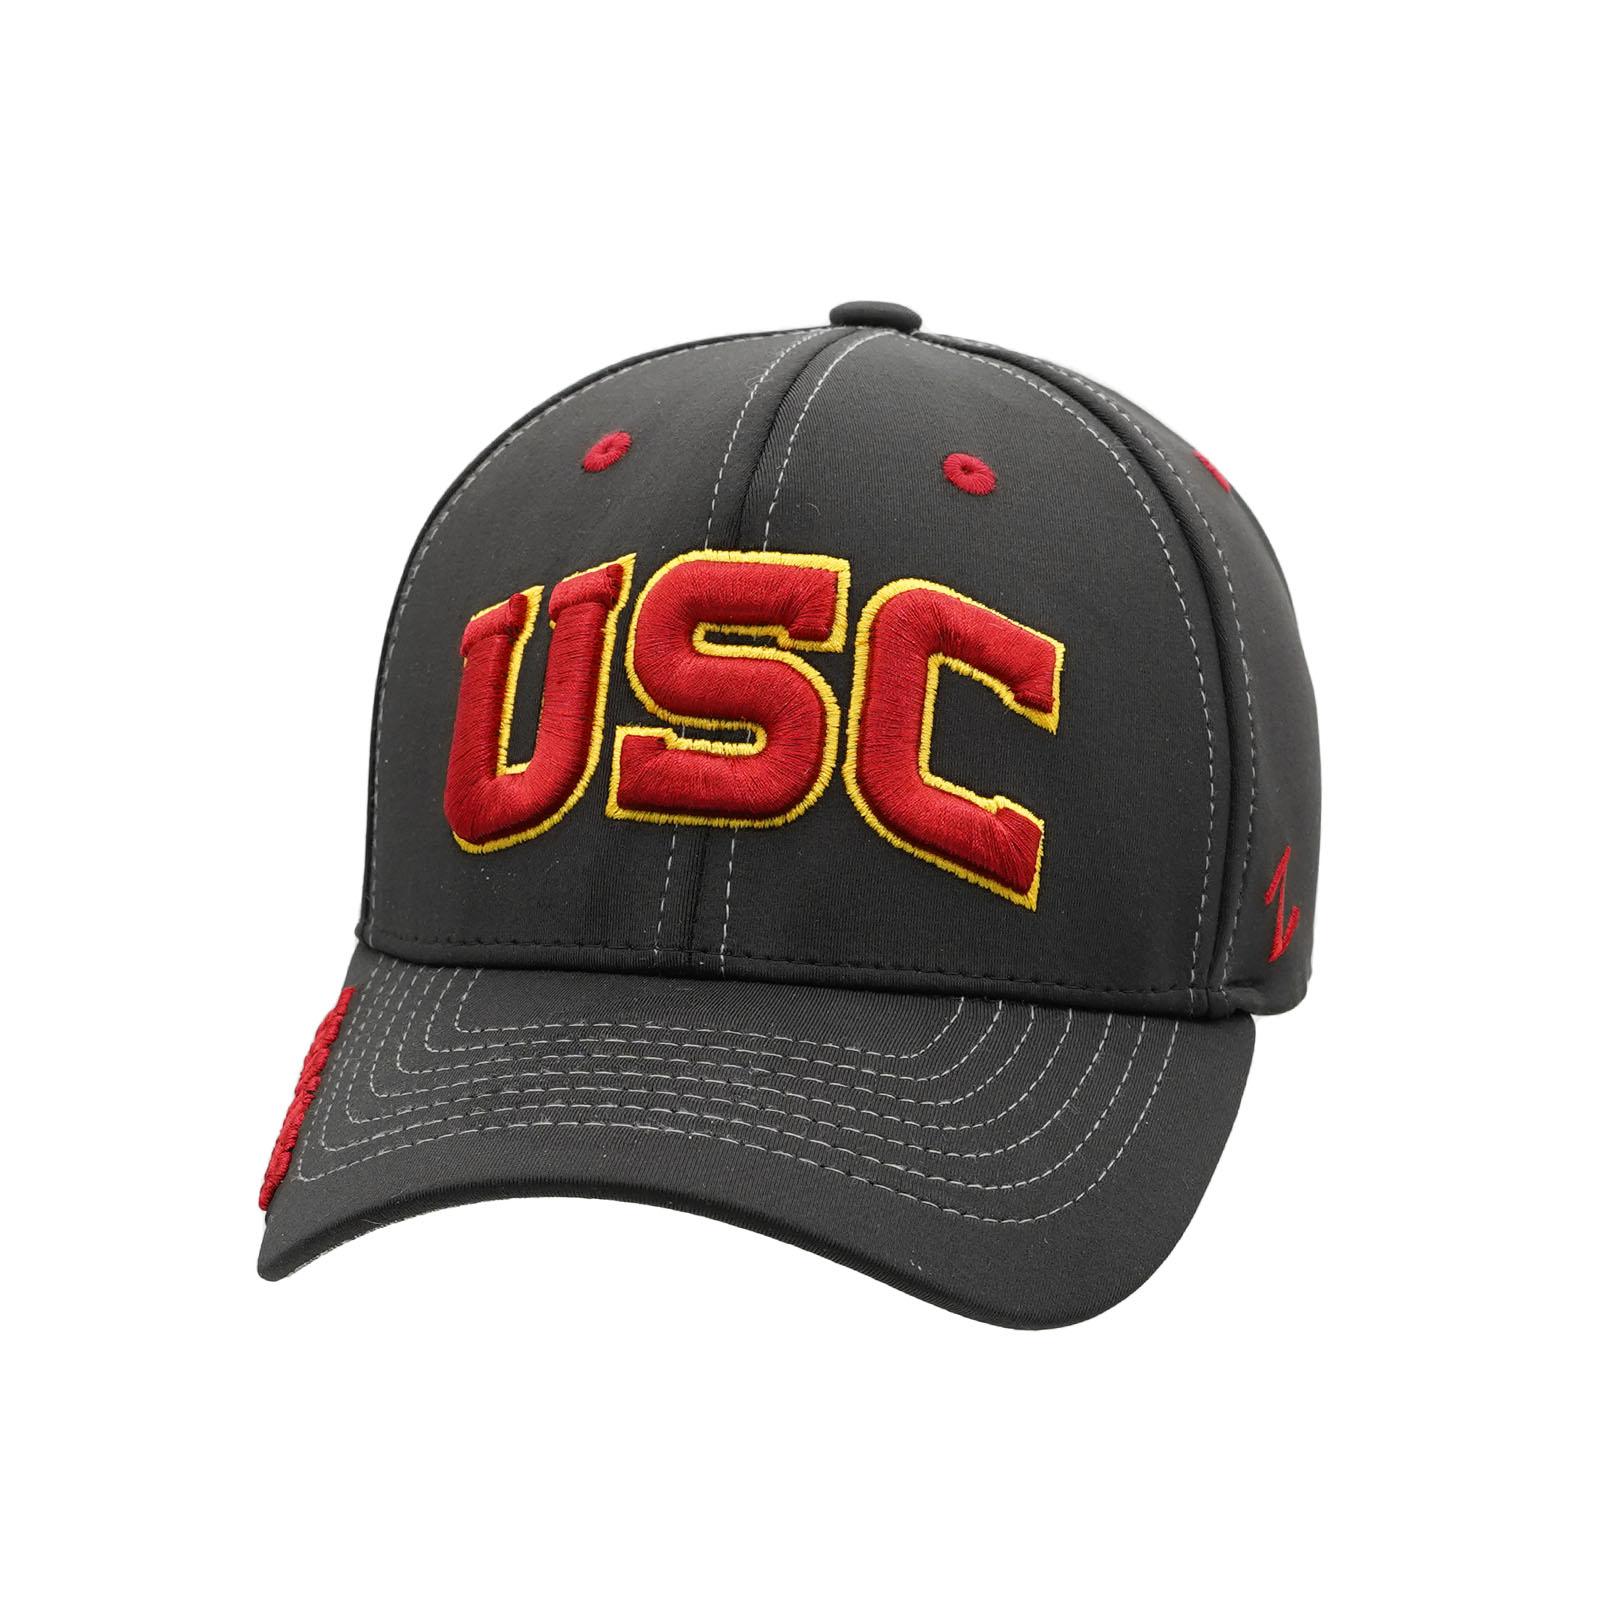 USC Trojans Backyard Fitted Hat Black by Zephyr image01